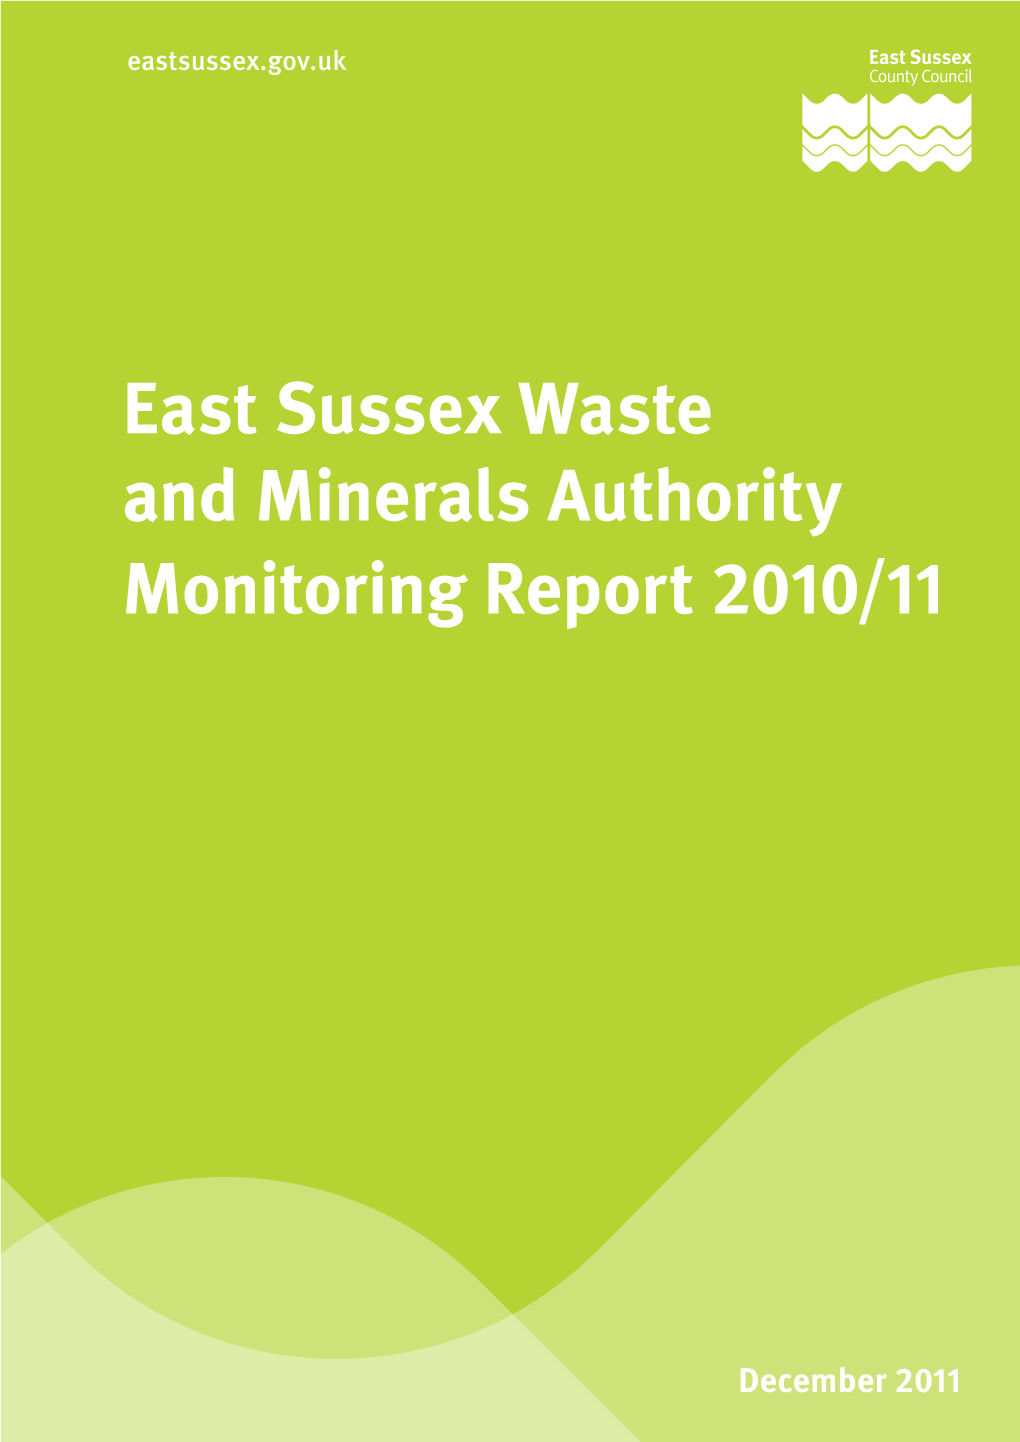 East Sussex Waste and Minerals Authority Monitoring Report 2010/11